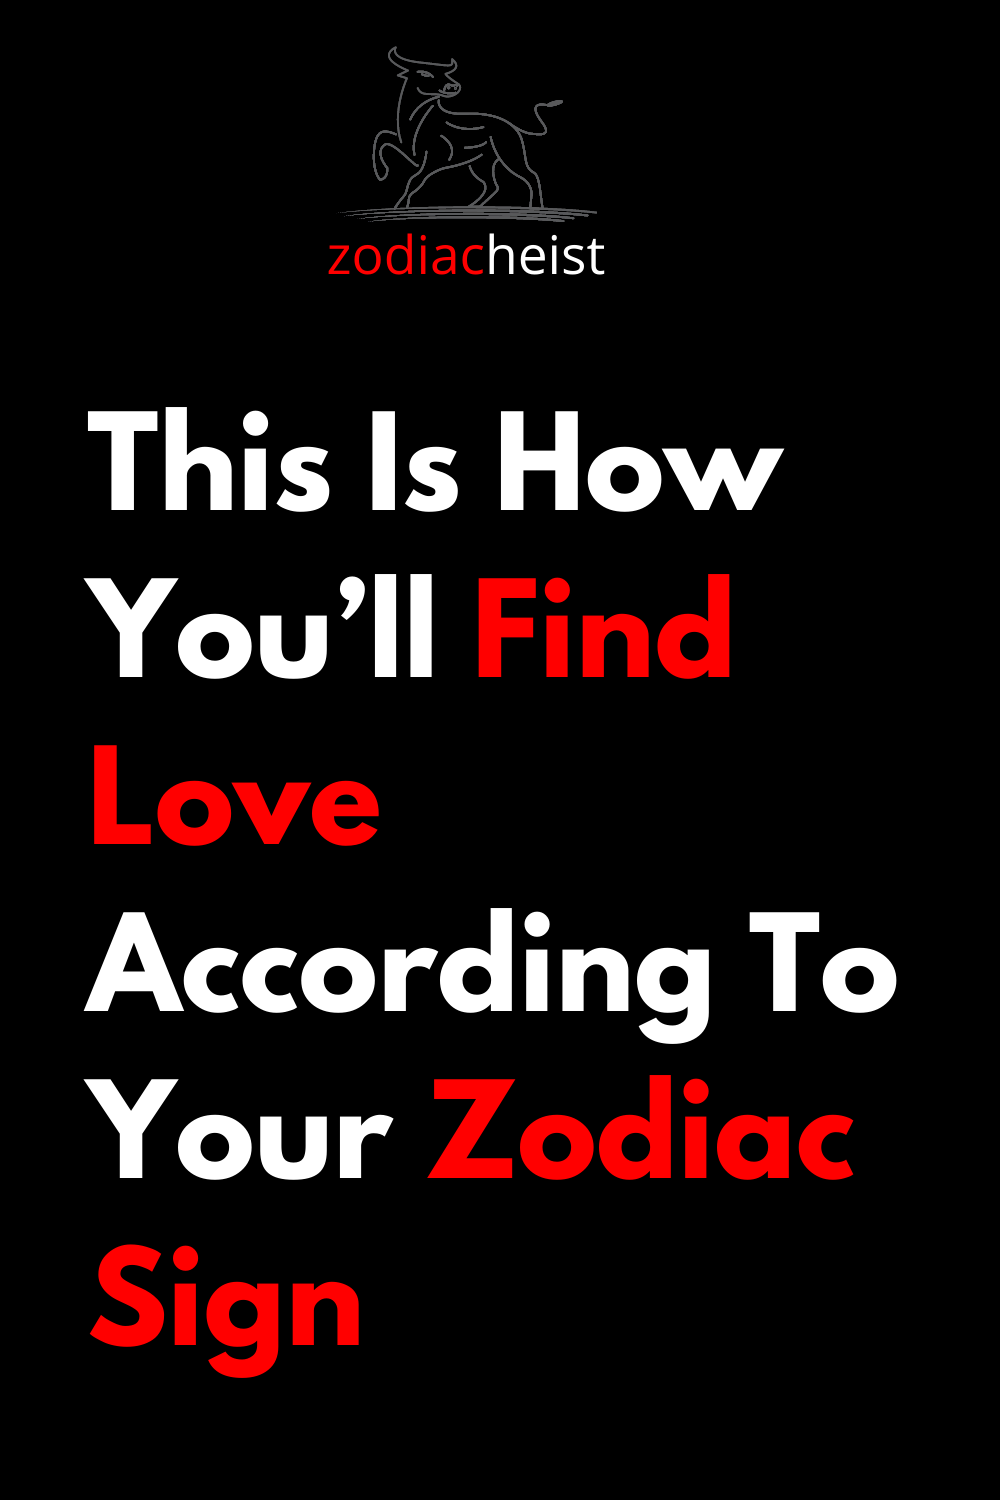 This Is How You’ll Find Love According To Your Zodiac Sign